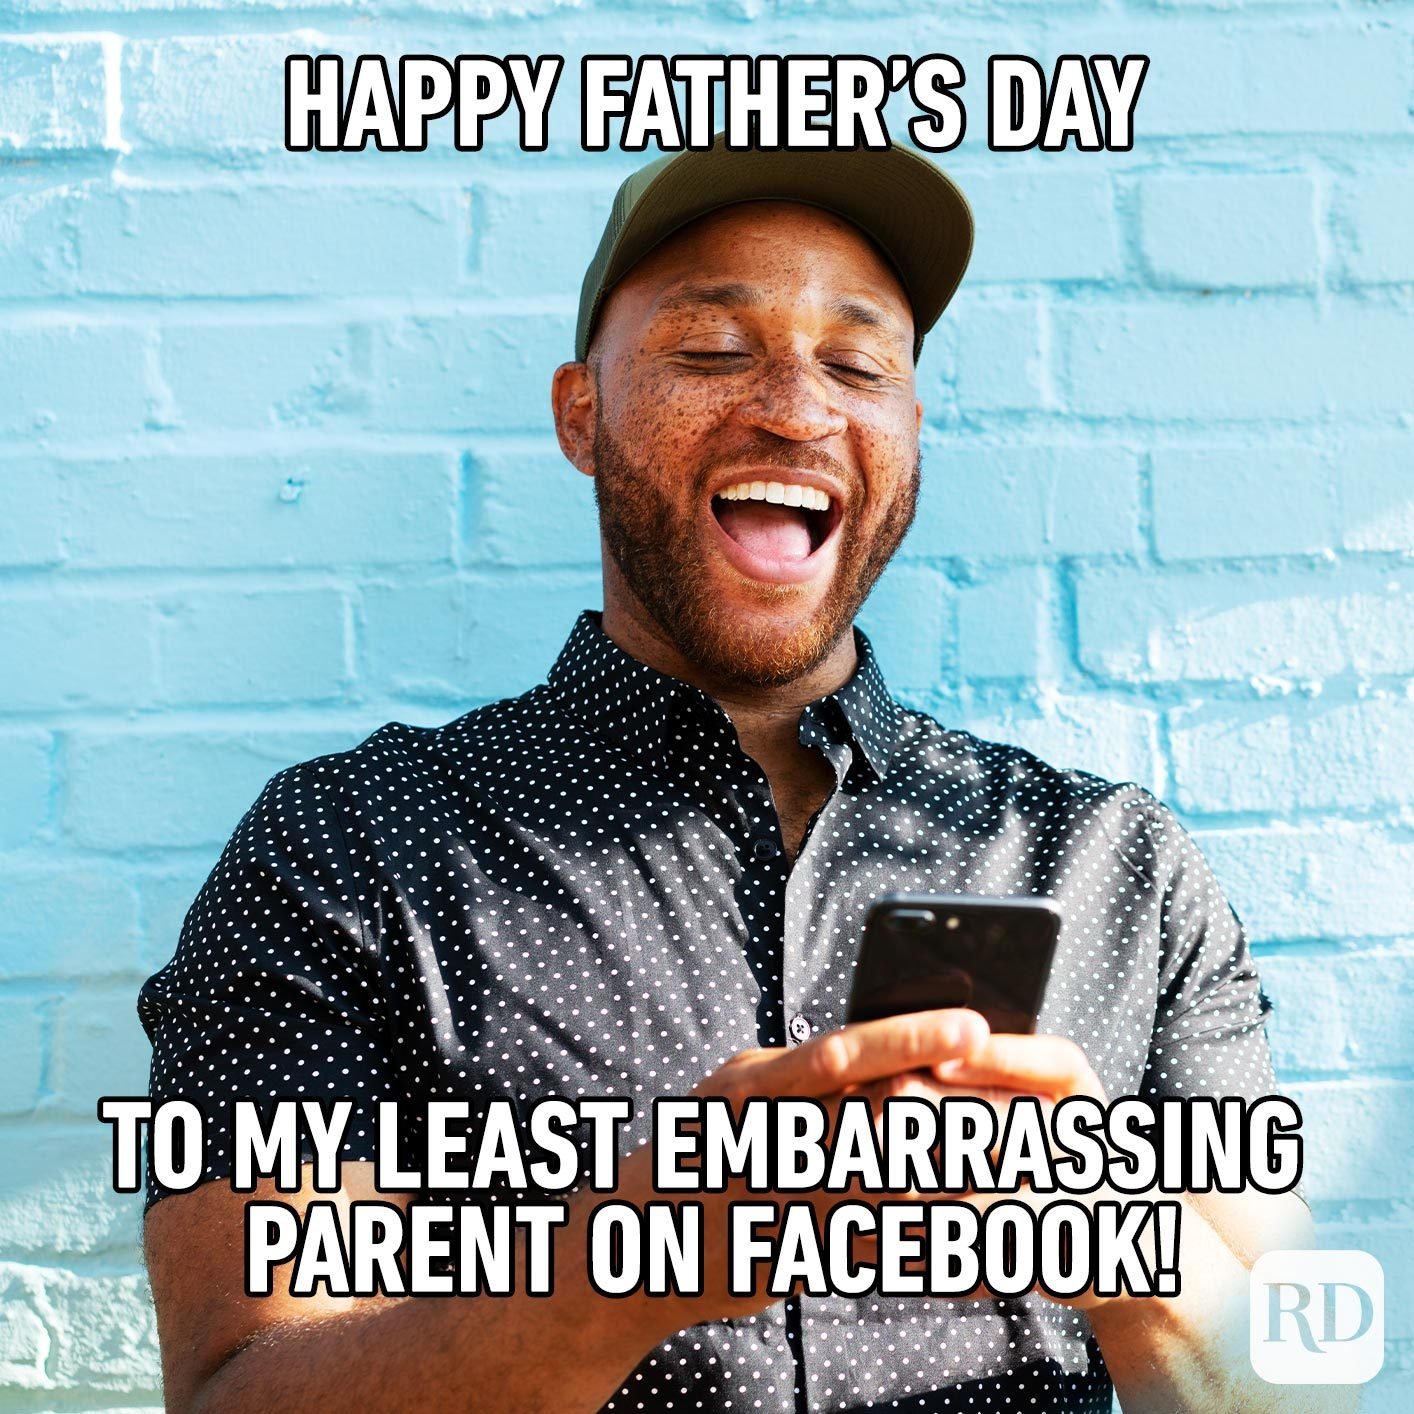 Man laughing at phone. Meme text: Happy Father's Day to my least embarrassing parent on Facebook!